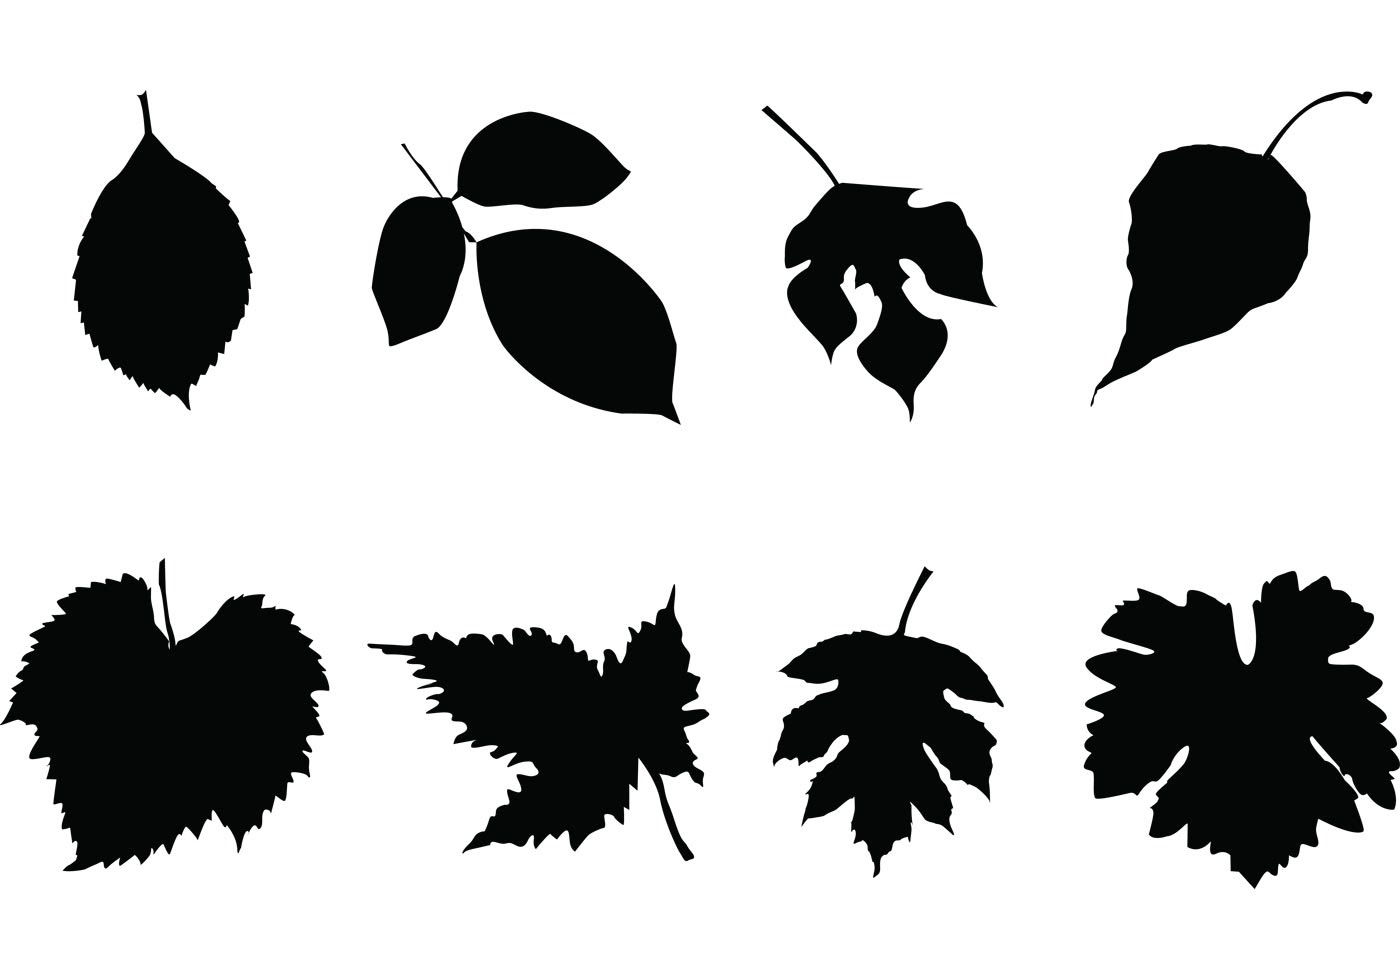 Download Free Leaf Silhouettes Vector Set - Download Free Vector ...